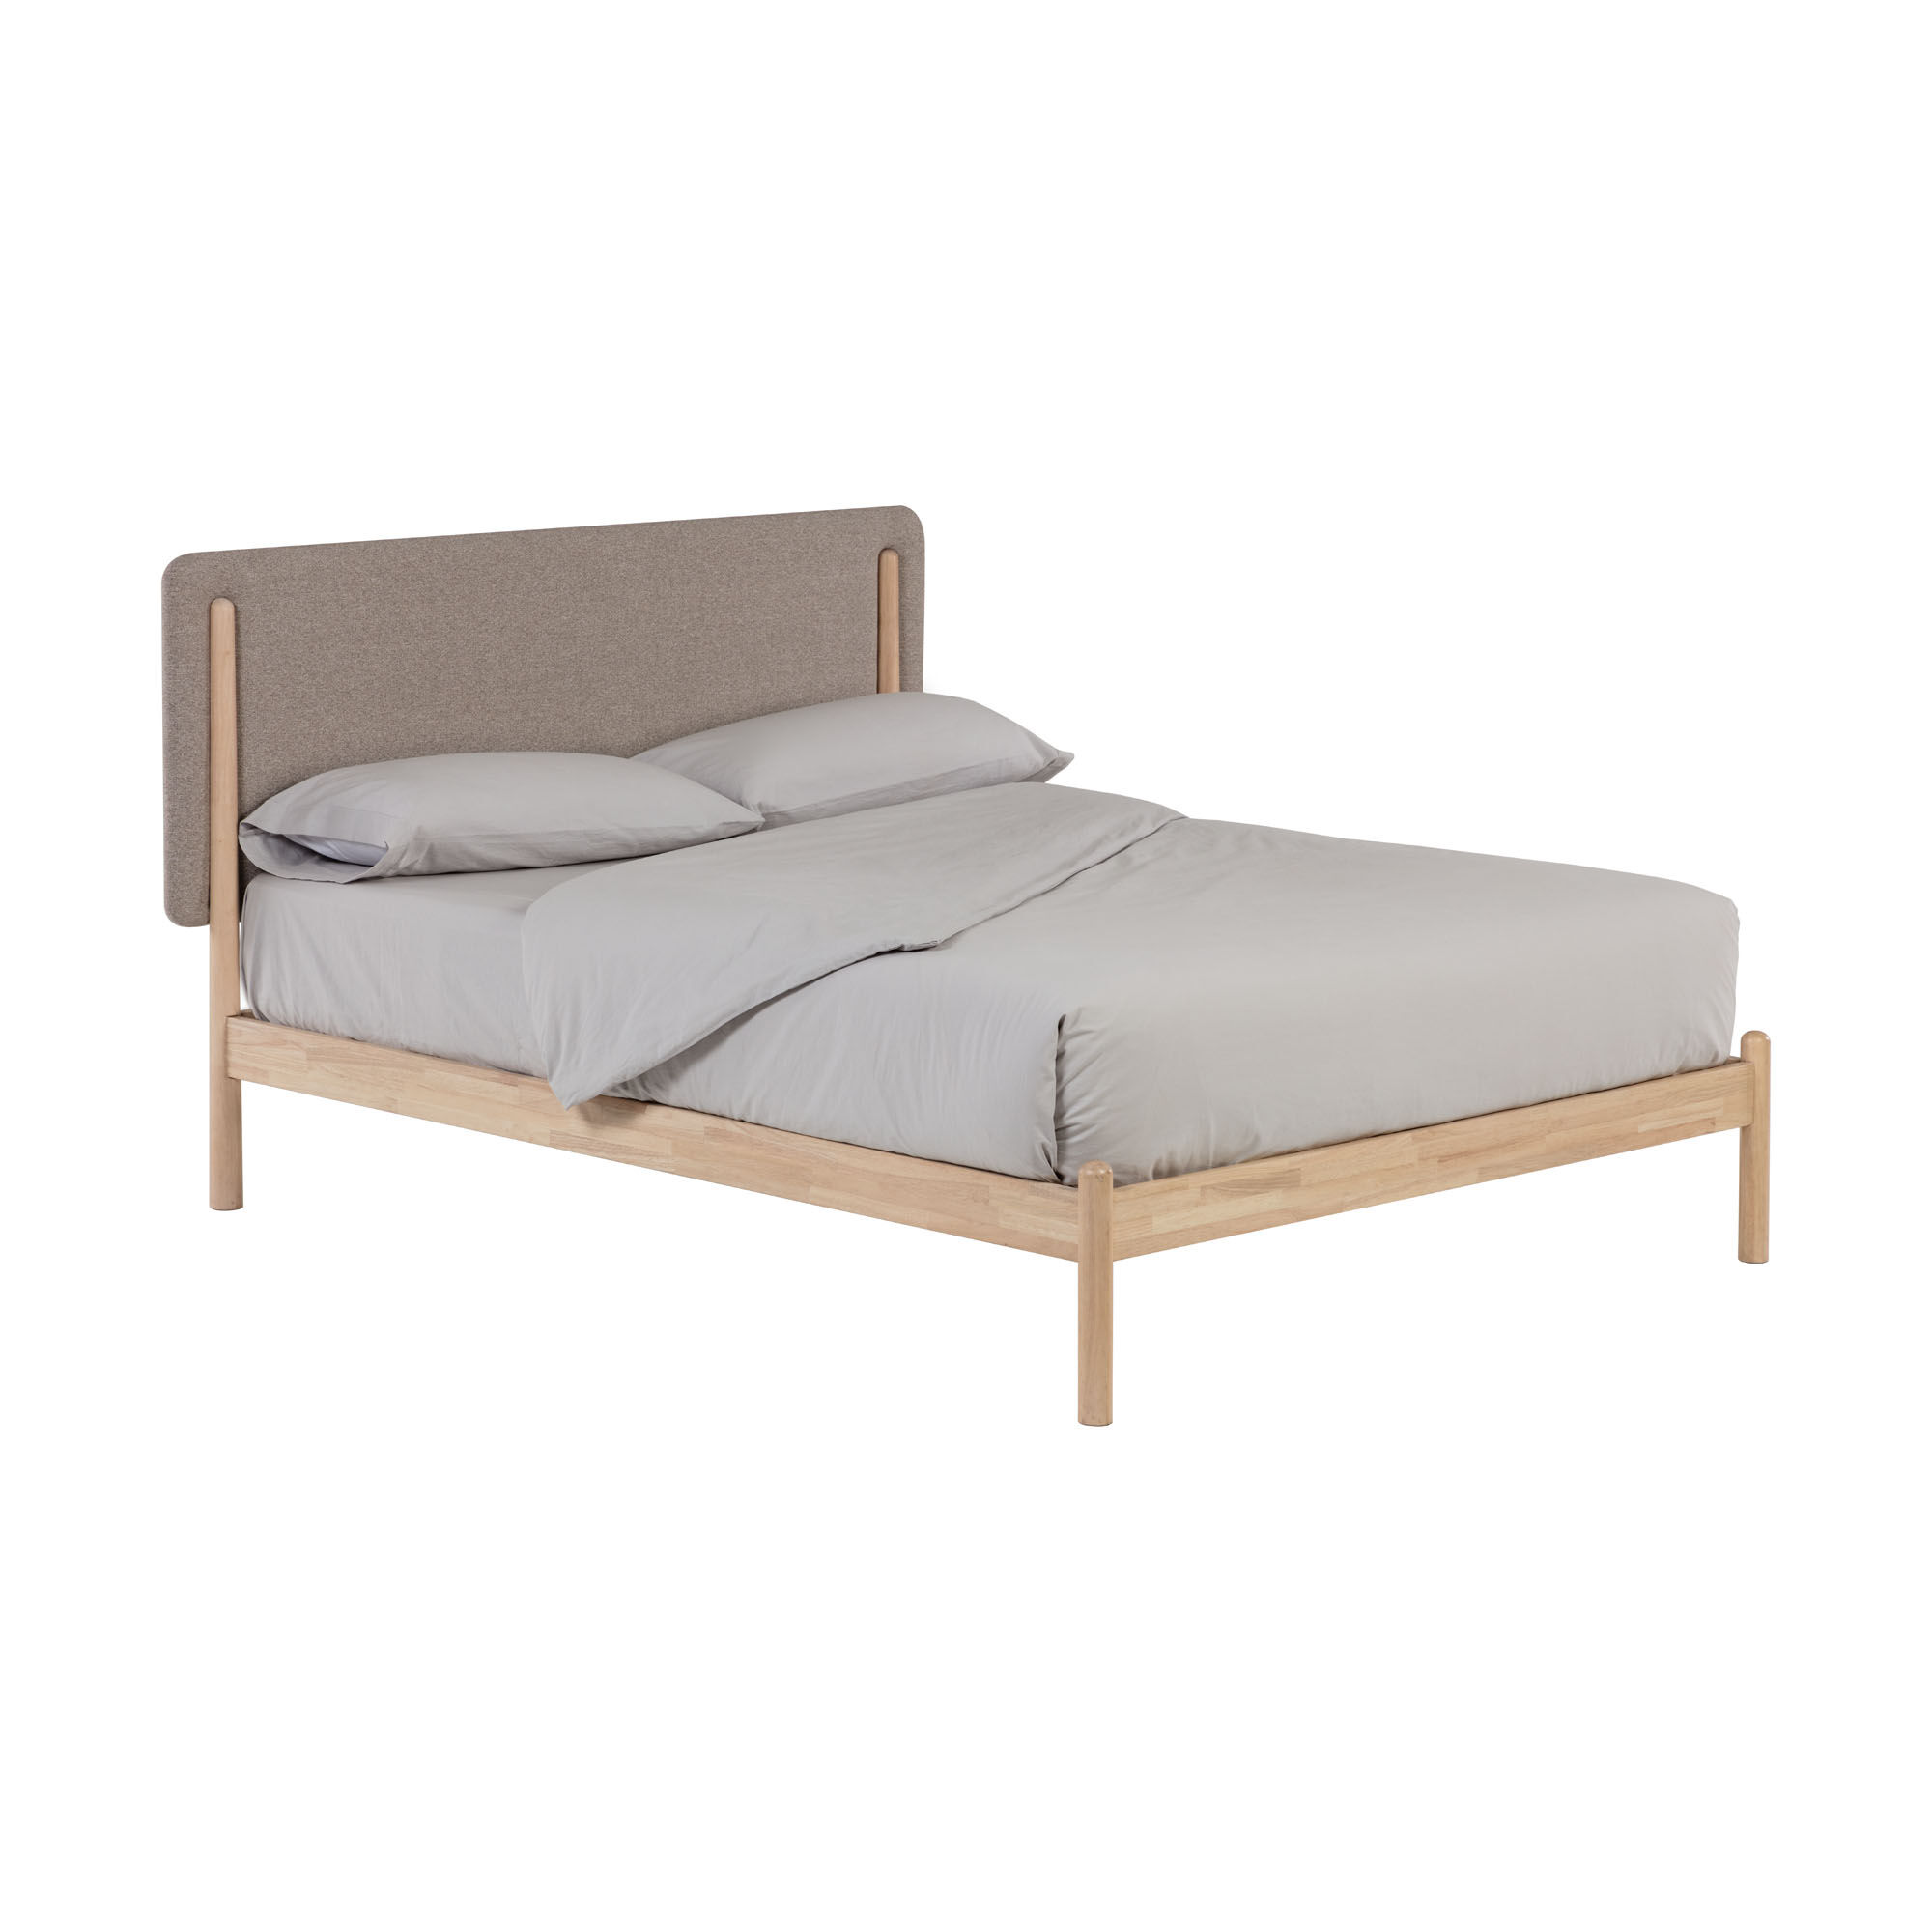 Kave Home Letto Shayndel 150x 190 cm